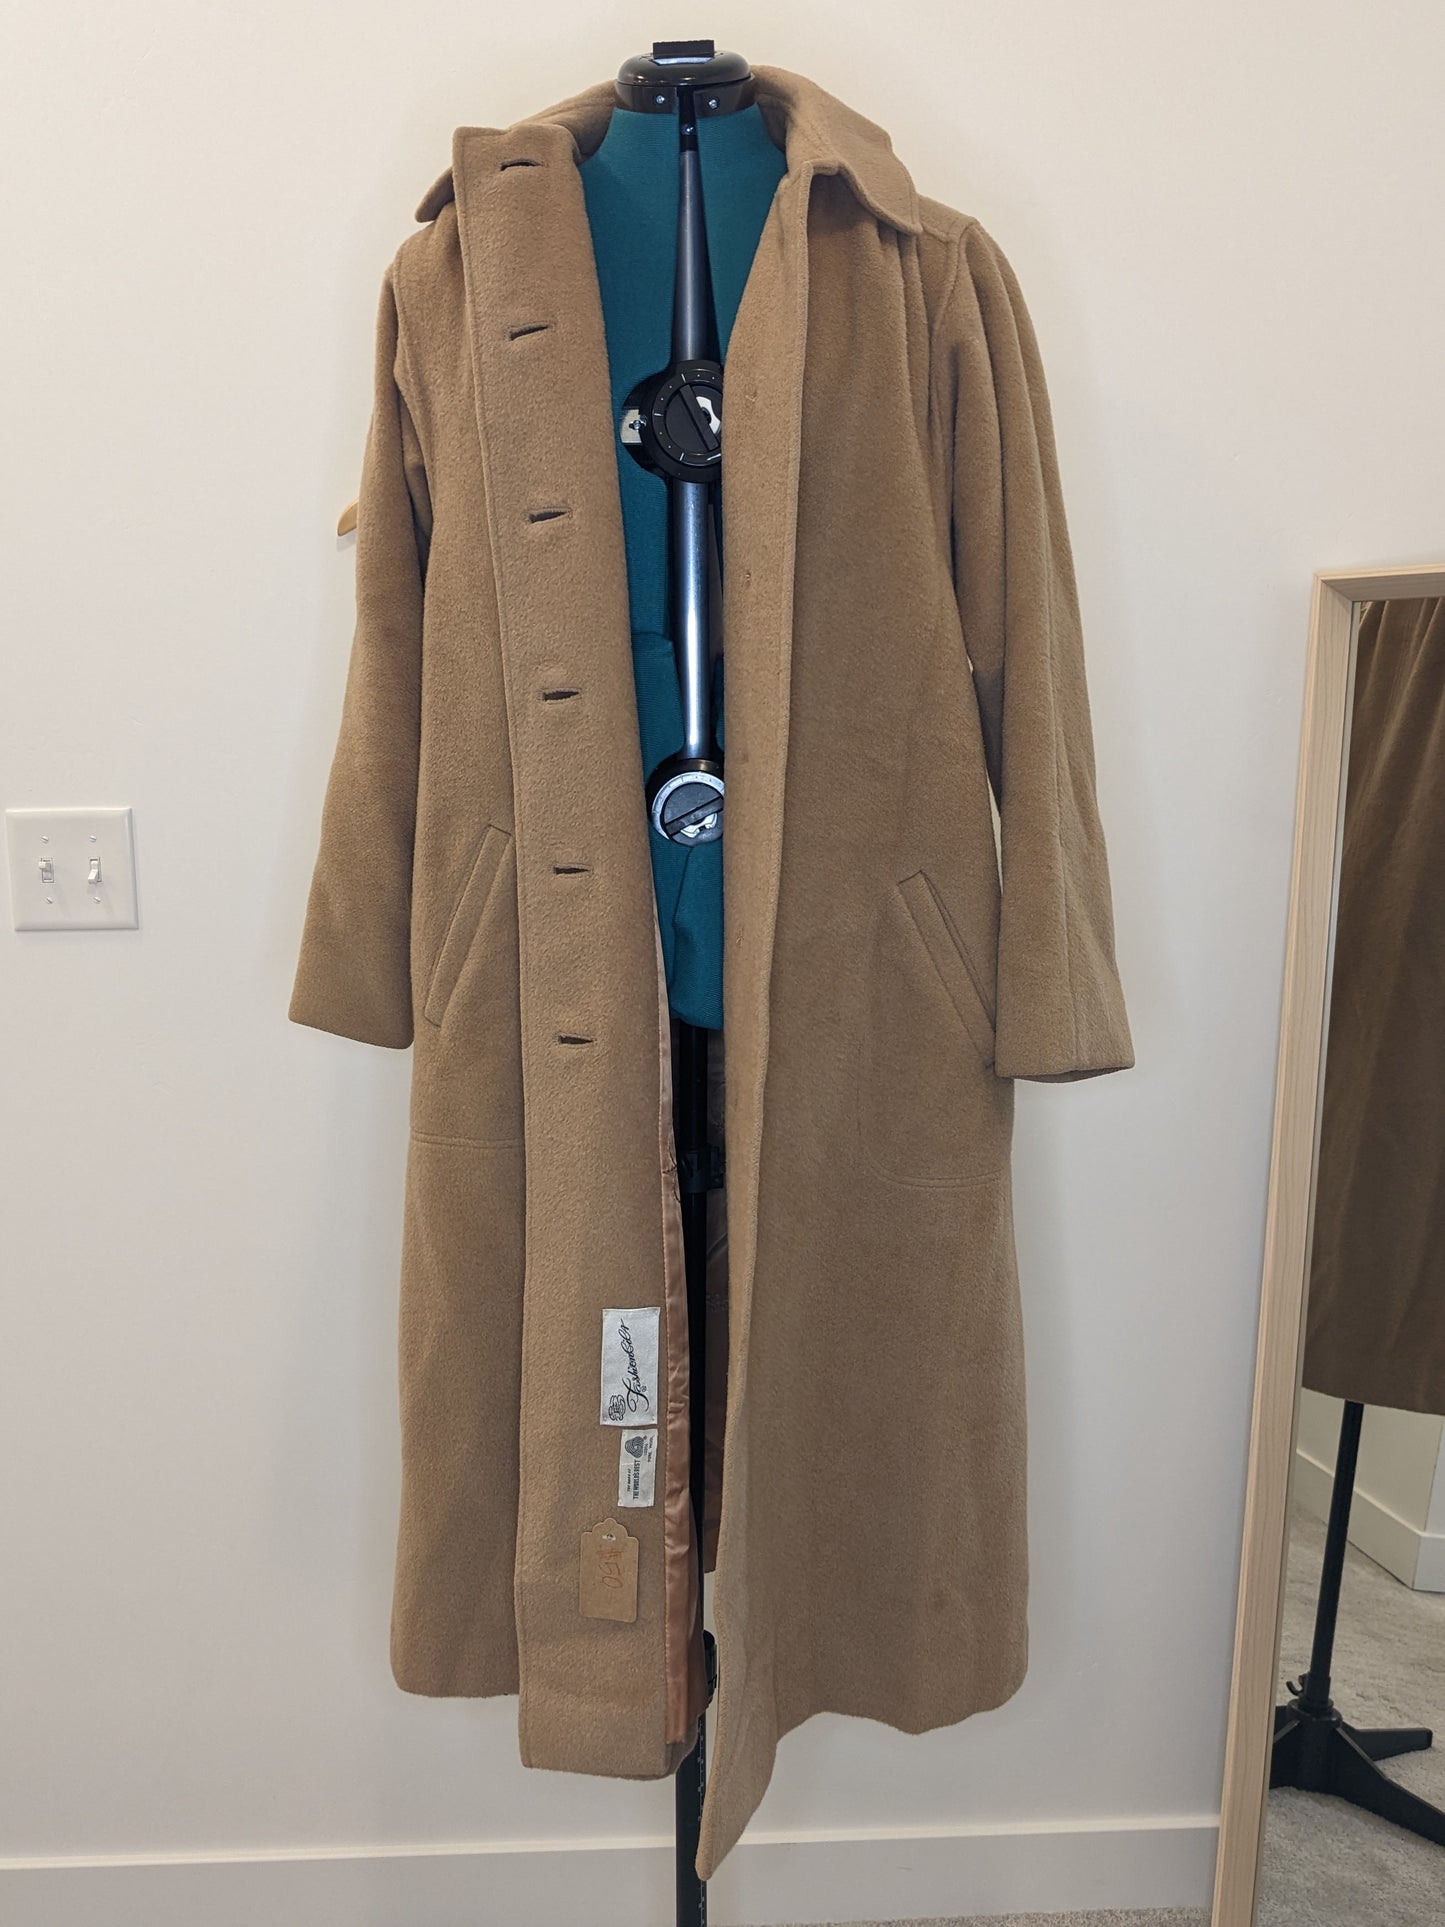 Vintage Union Made Forstmann Camel Hair Long Trench Coat